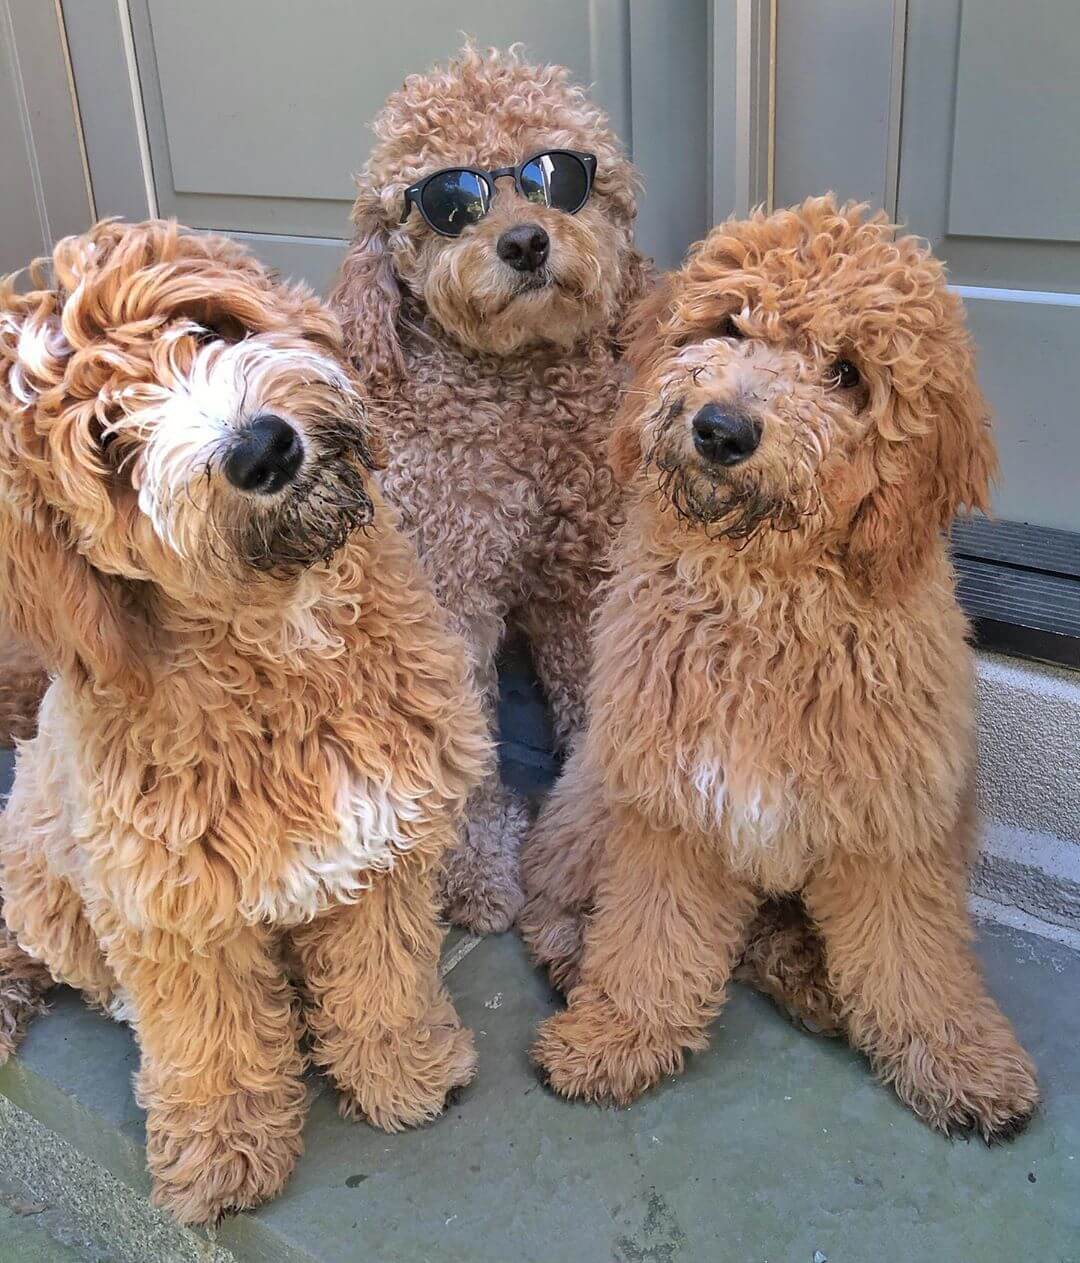 How Much Are Goldendoodles?